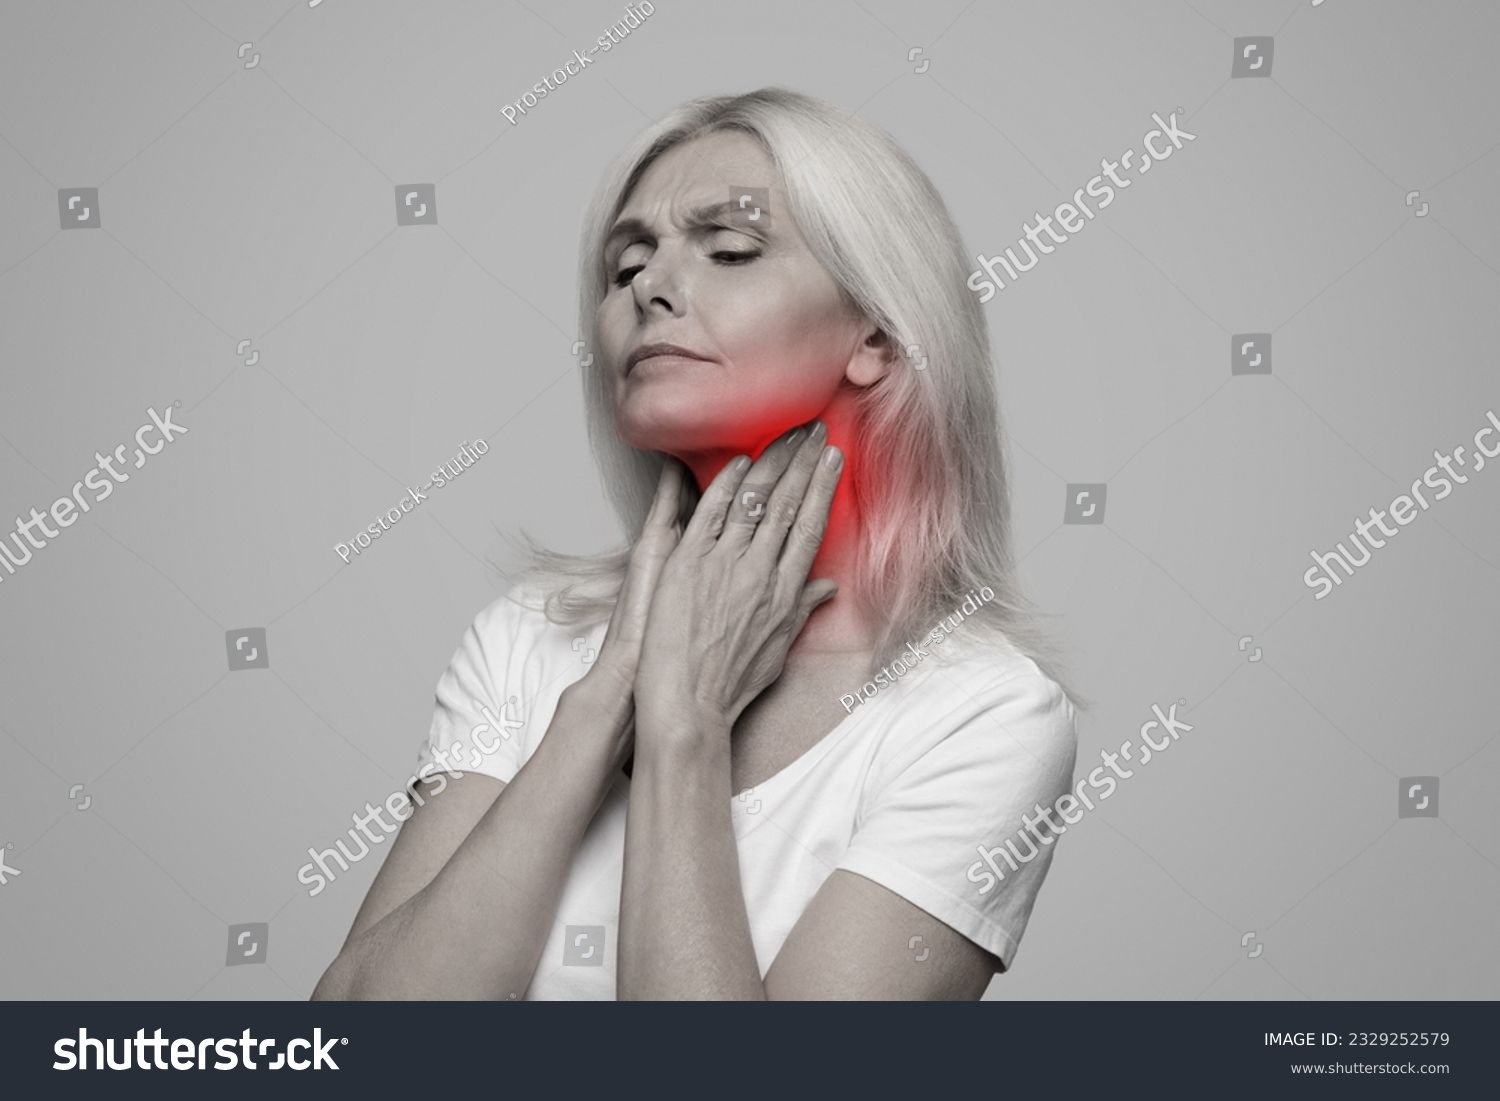 Sick mature lady having sore throat, touching her neck with red inflamed zone, suffering from laryngeal disorder, tonsillitis, throat cancer, cold, posing on studio background, black and white photo #2329252579